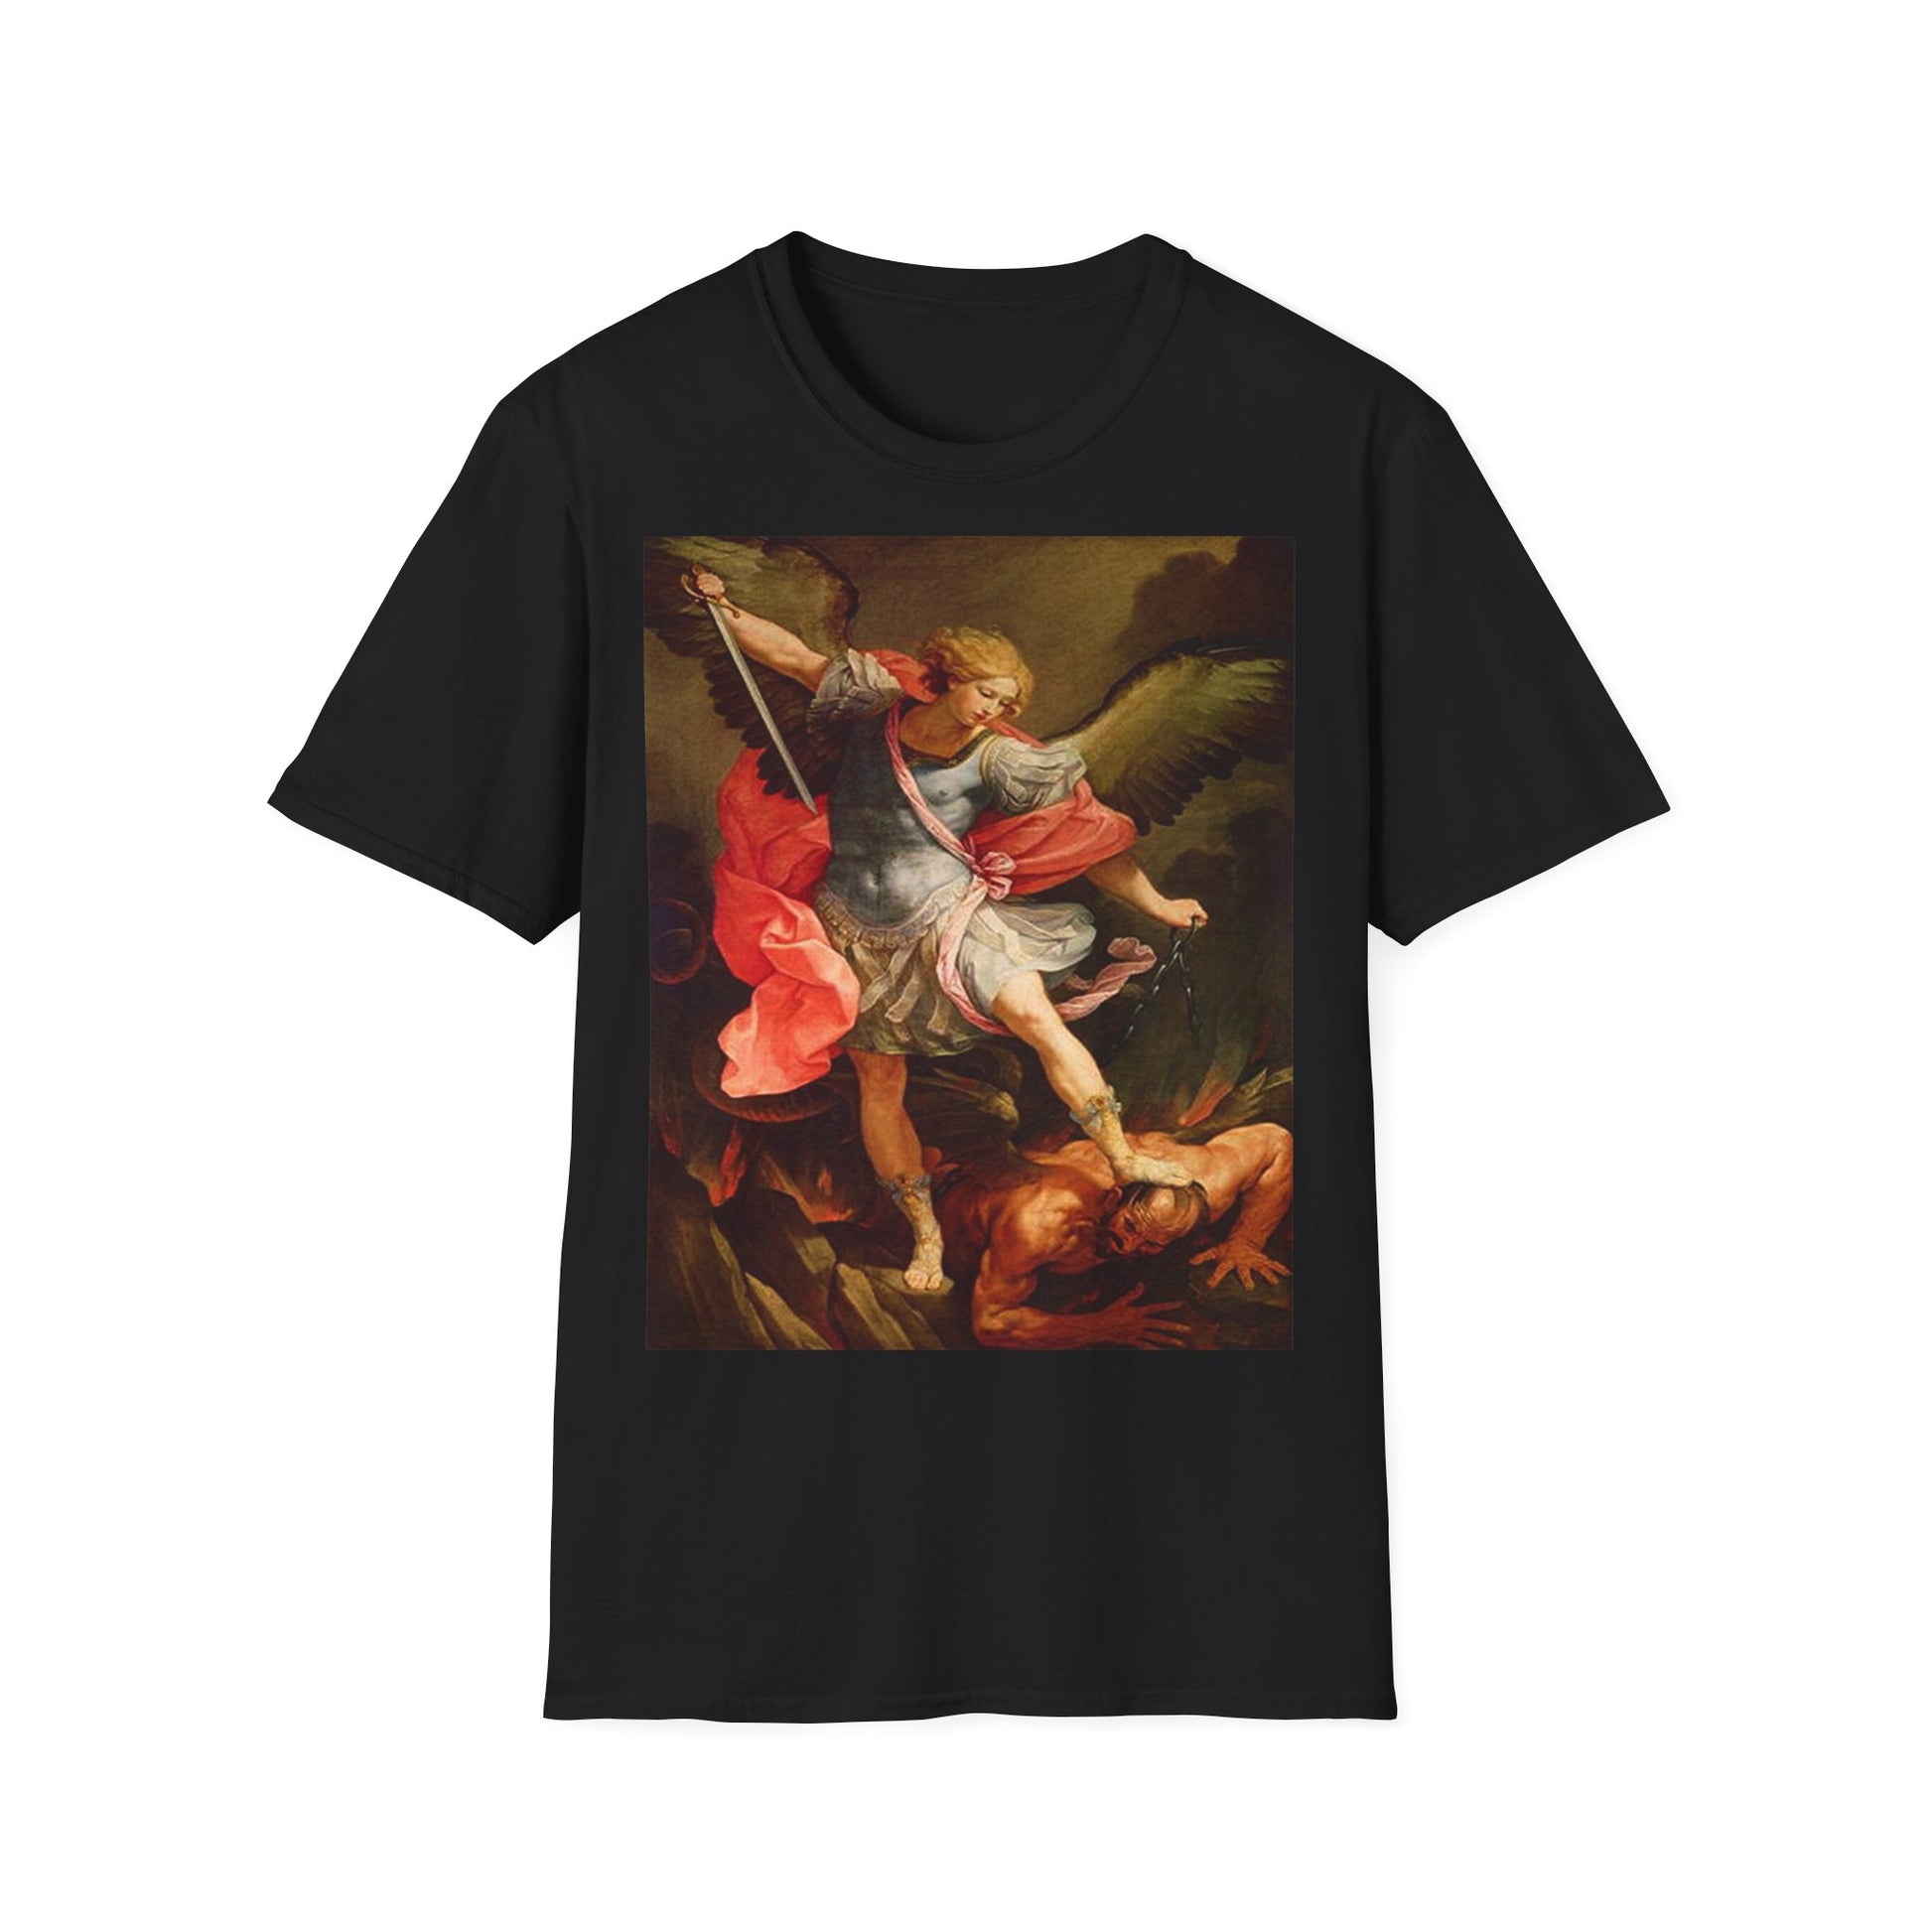 A black t-shirt with a design of Archangel Michael defeating Satan.